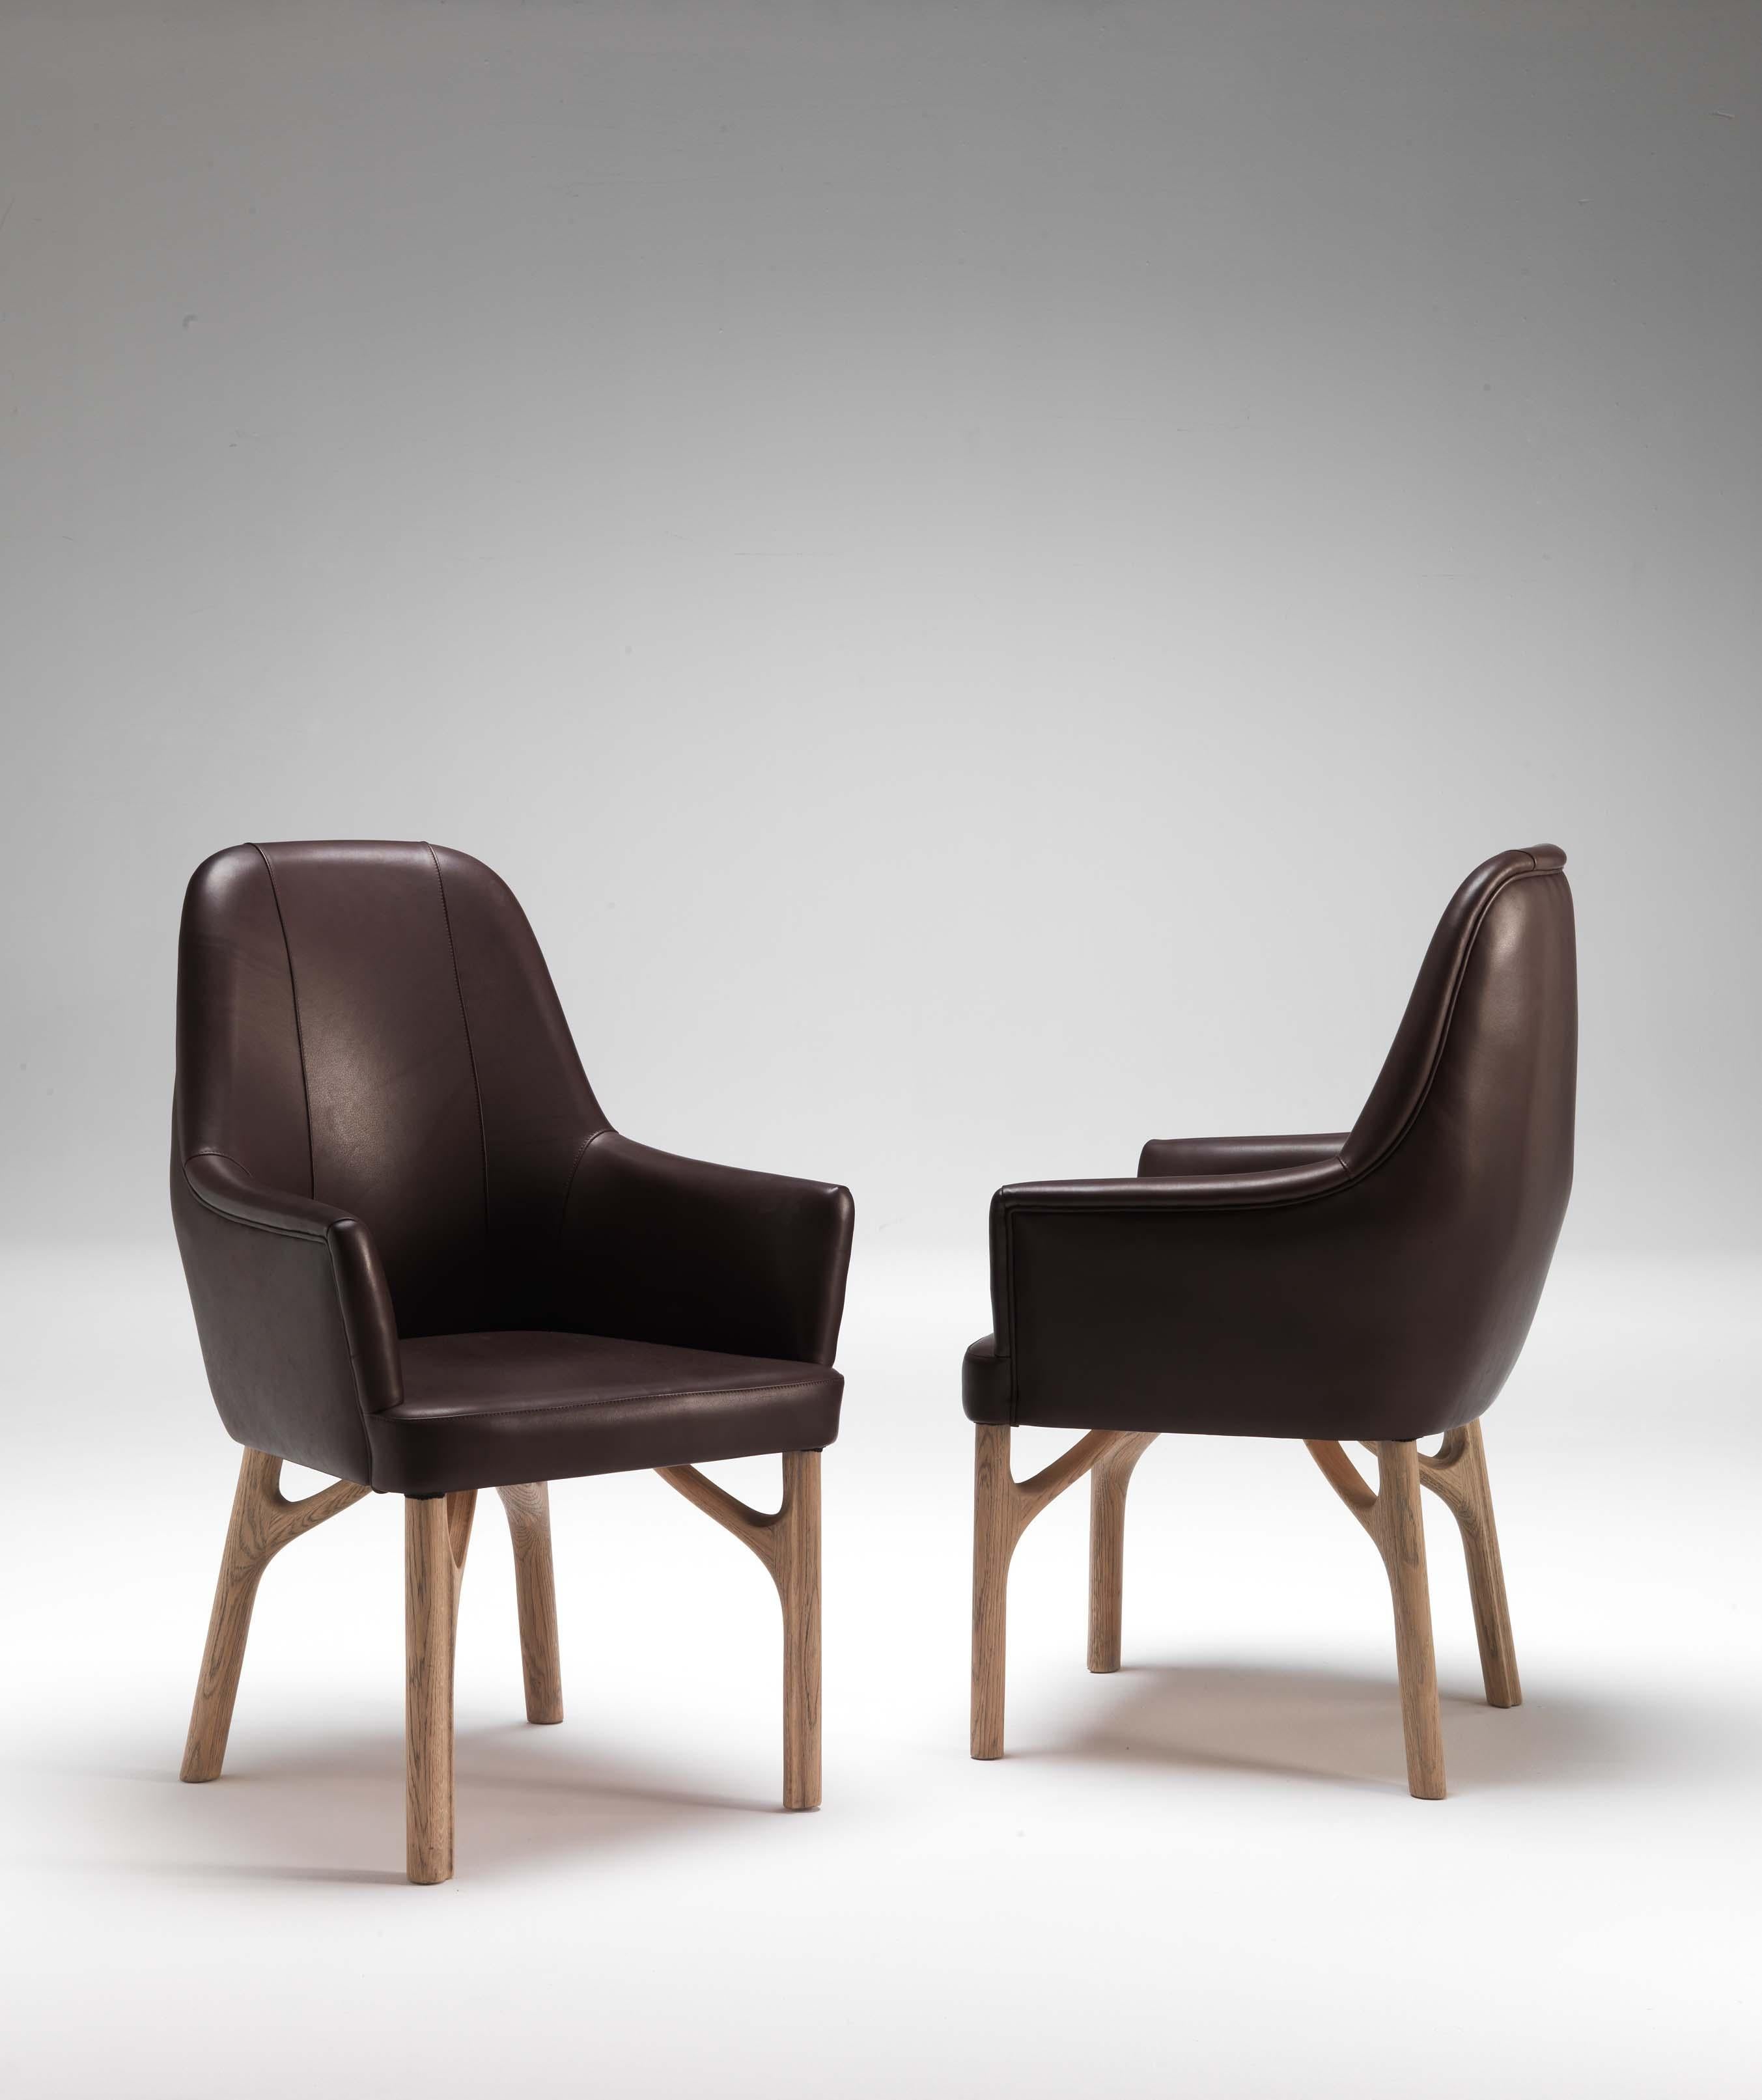 The Arpeggio armchair is a masterpiece of Italian craftsmanship designed by Giopato & Coombes. Embracing sinuous shapes and essential lines, these pieces delicately accompany tables with a touch of timeless elegance. The designers seamlessly blend